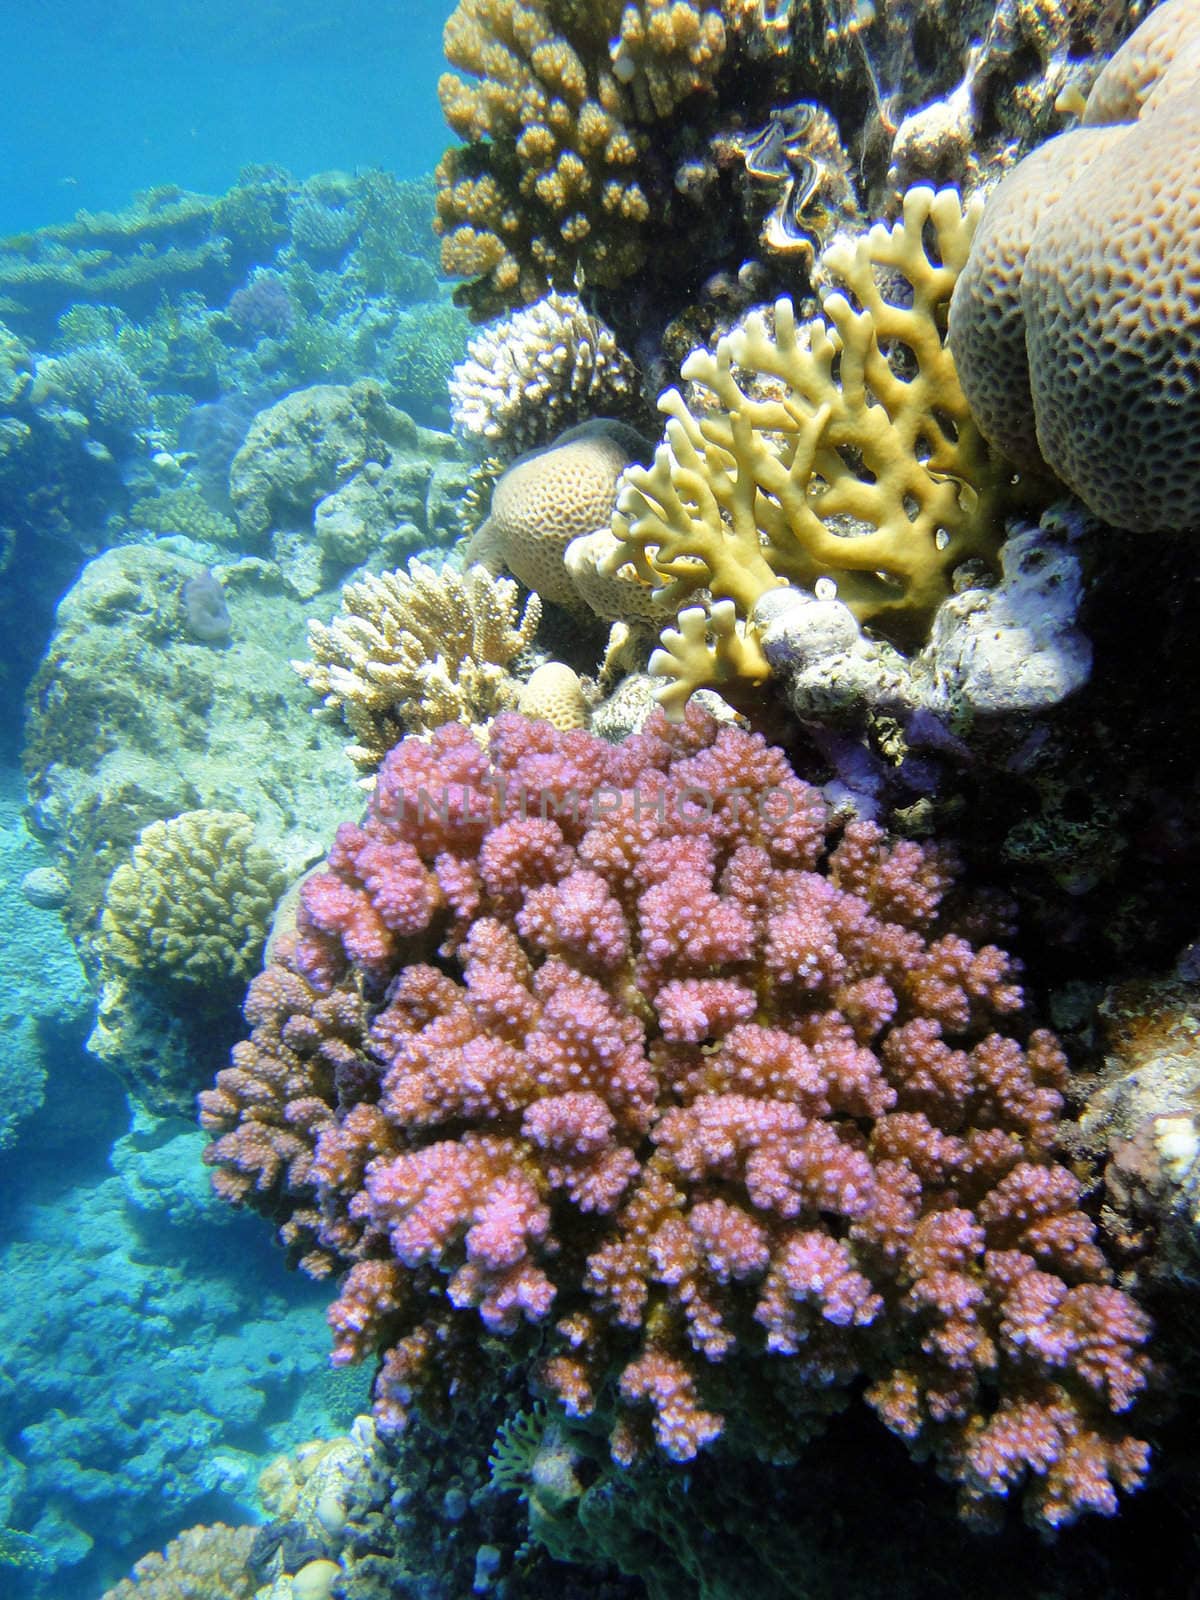 Coral garden in Red sea 3 by georg777